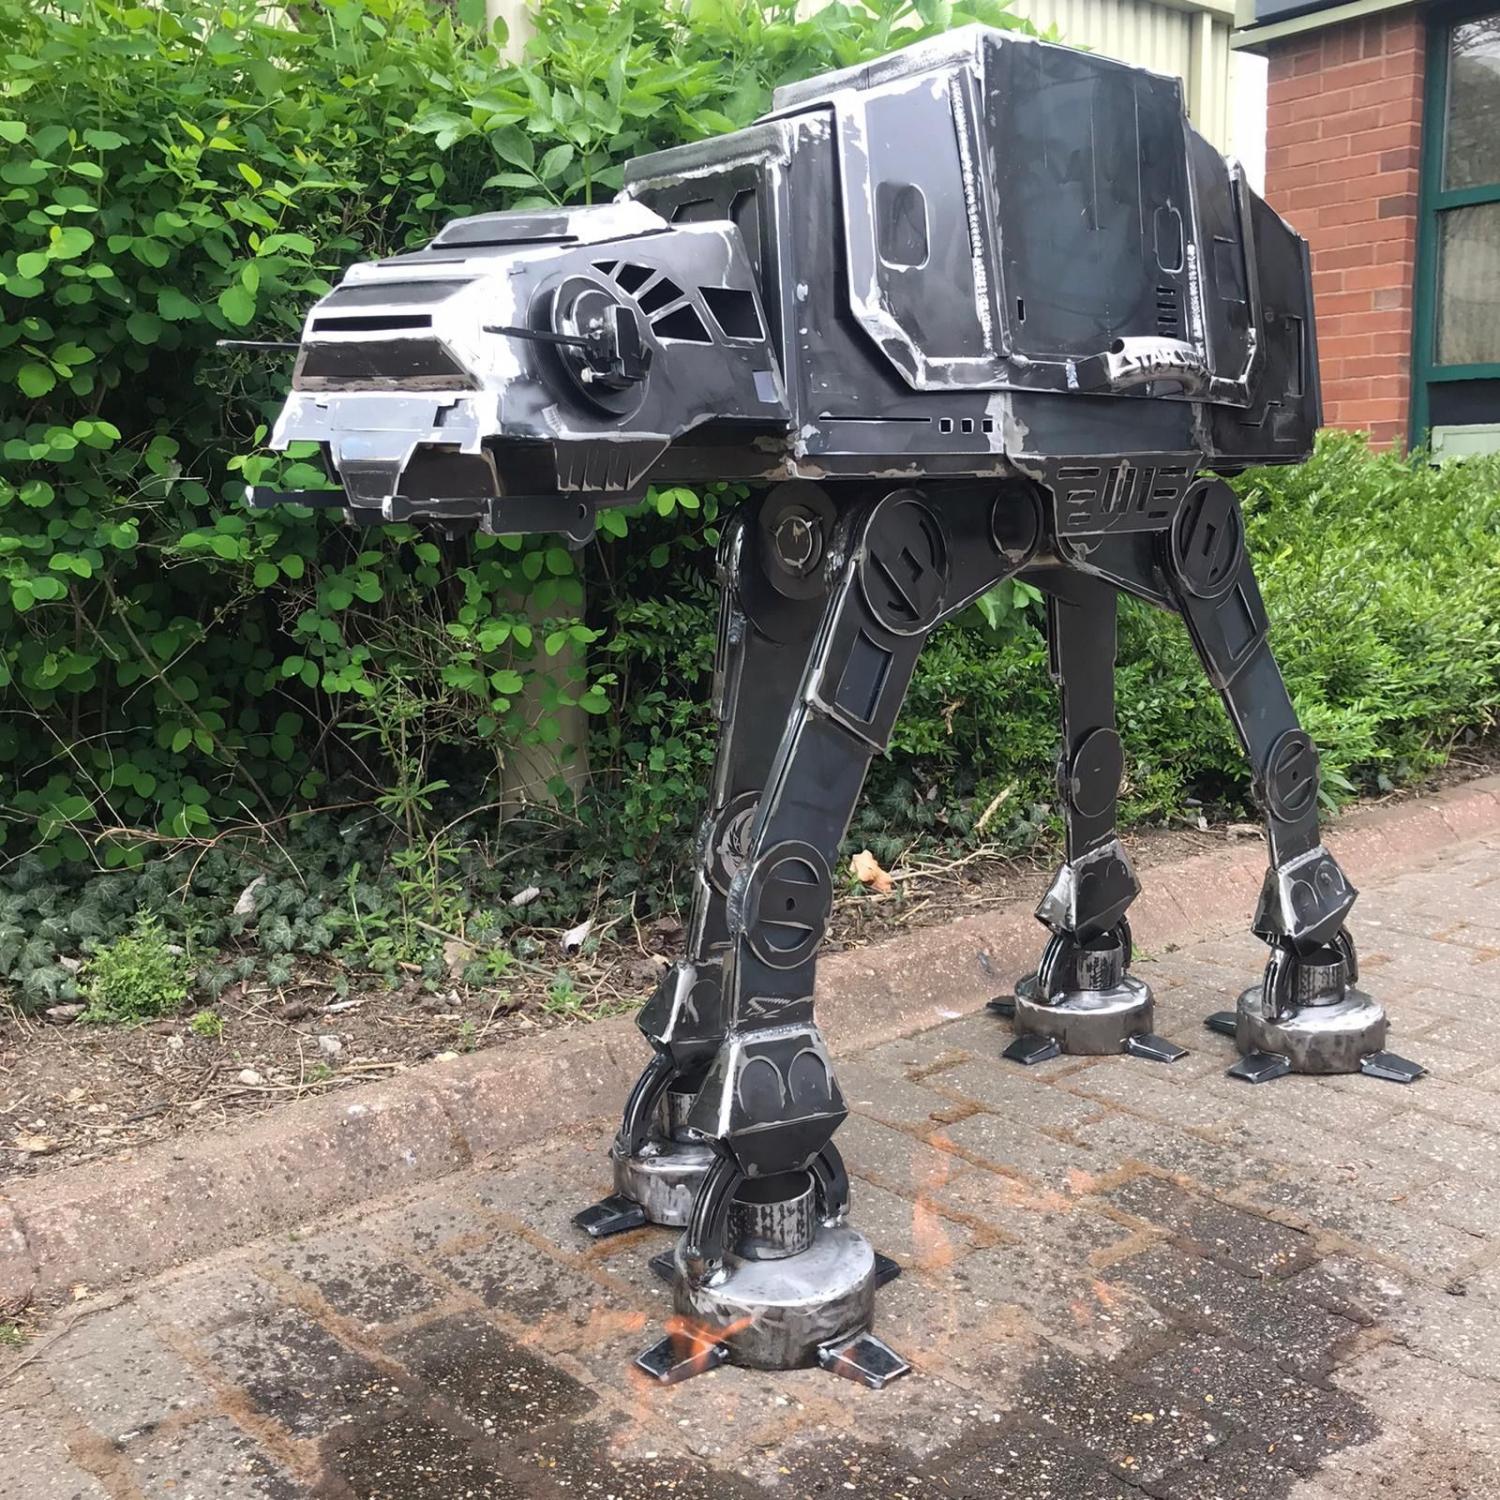 Giant At-At BBQ Grill - Star Wars Walker Metal Barbecue